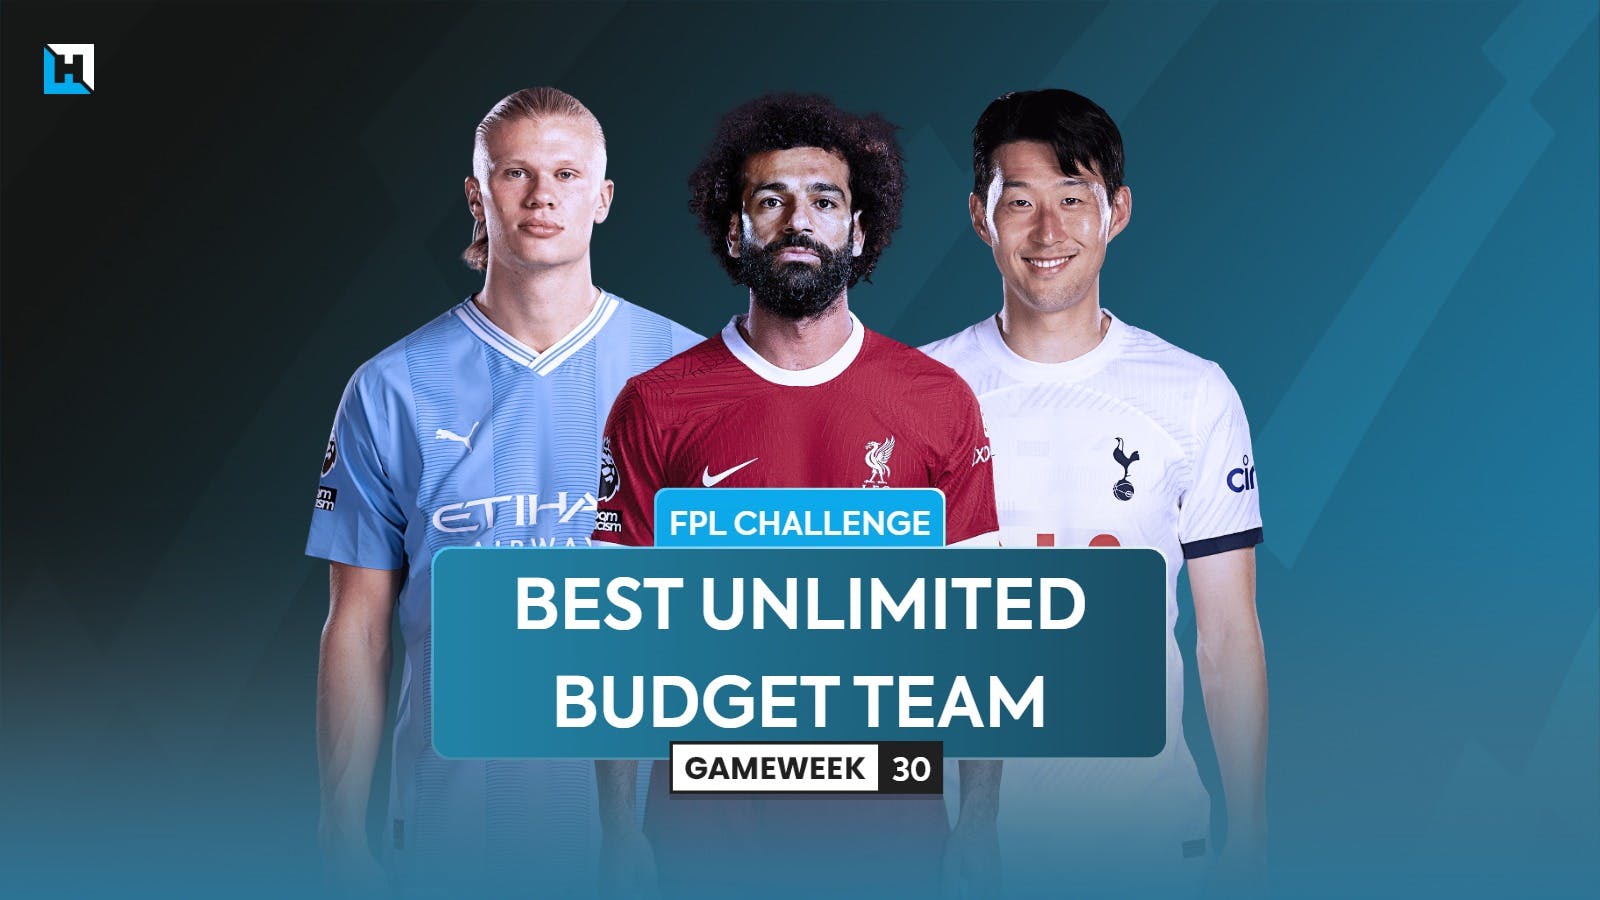 FPL Challenge: The best unlimited budget team for Gameweek 30 according to Hub AI